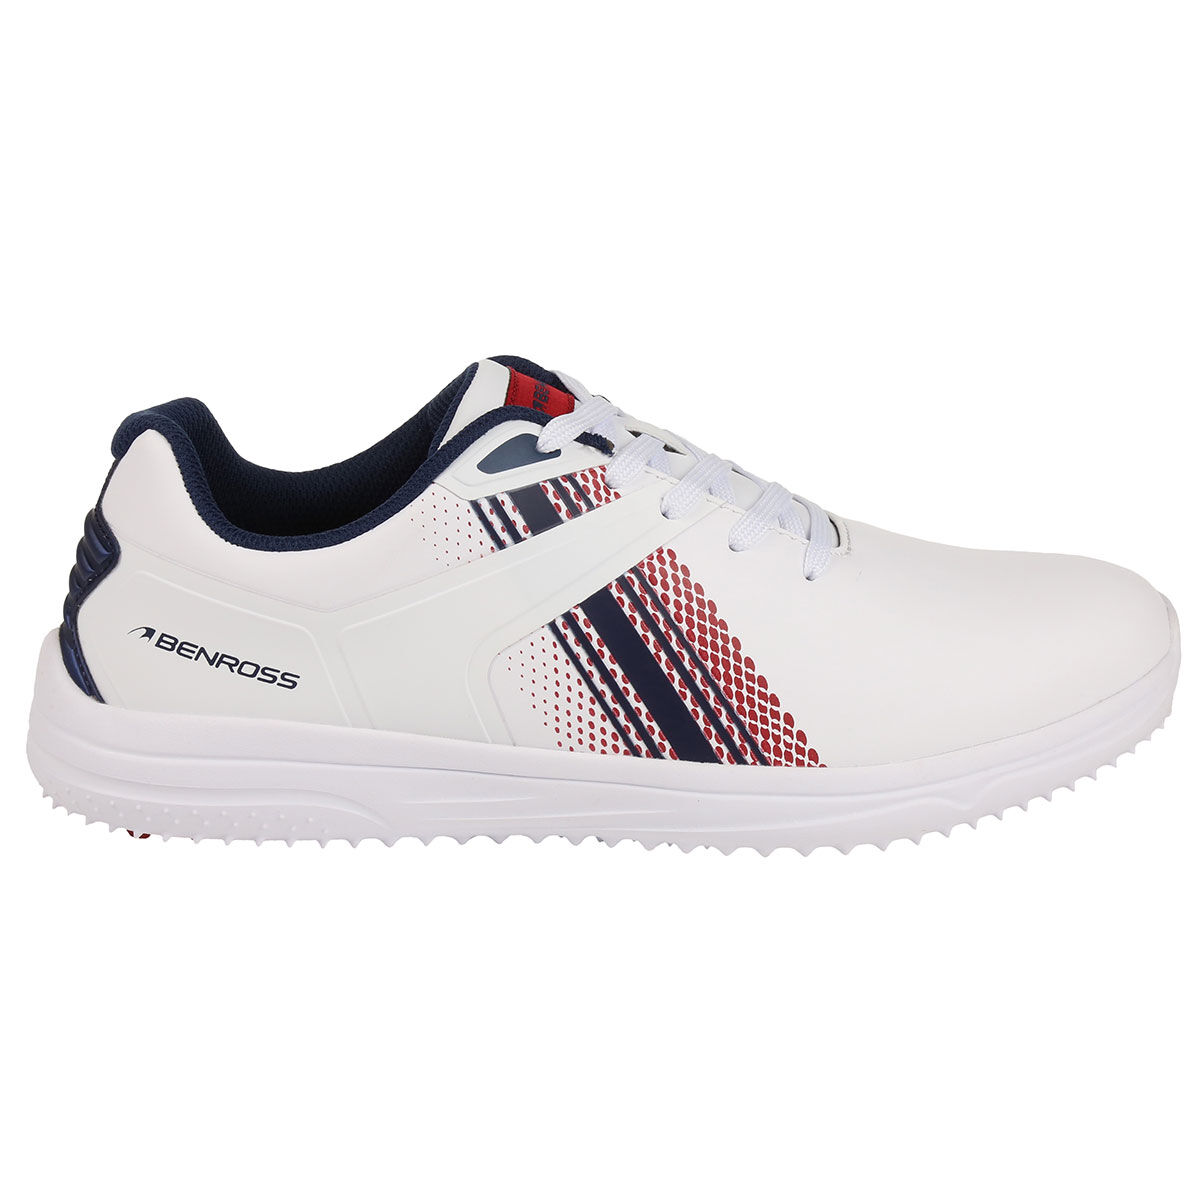 Benross Men's White, Navy Blue and Red Stylish Stripe Dynamo Waterproof Spikeless Golf Shoes, Size: 9 | American Golf von Benross